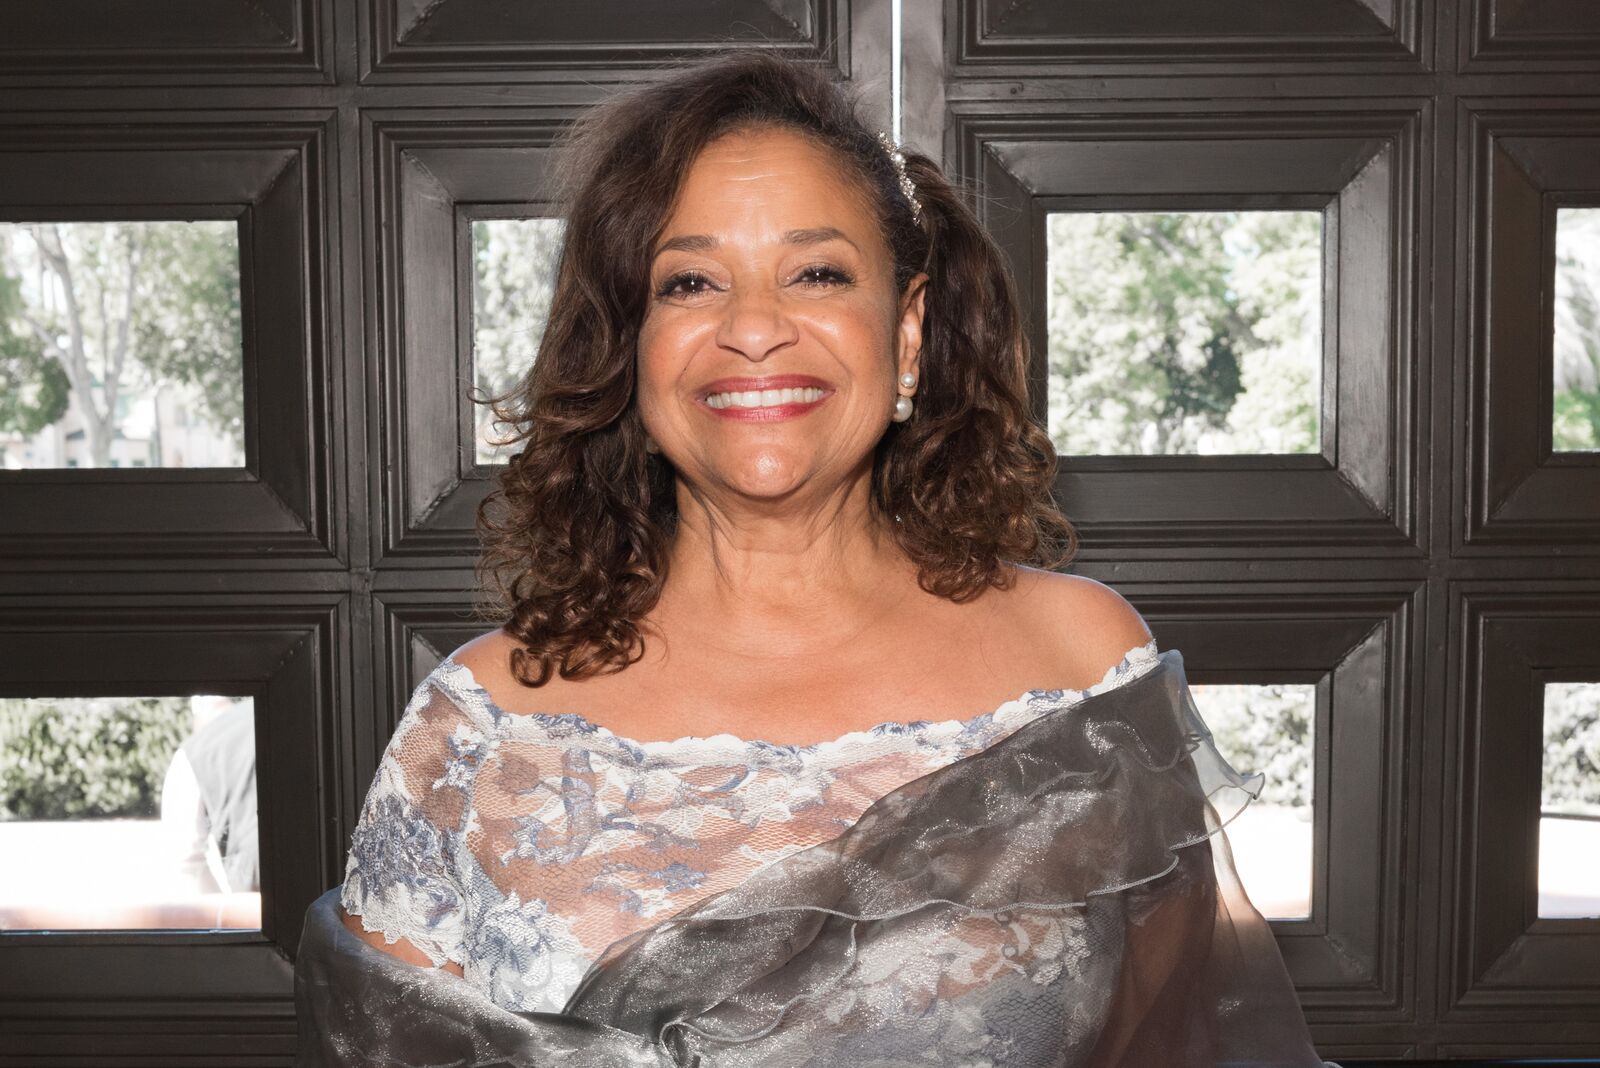 Debbie Allen on the Red Carpet at Wallis Annenberg Center in October 2017. | Photo: Getty Images